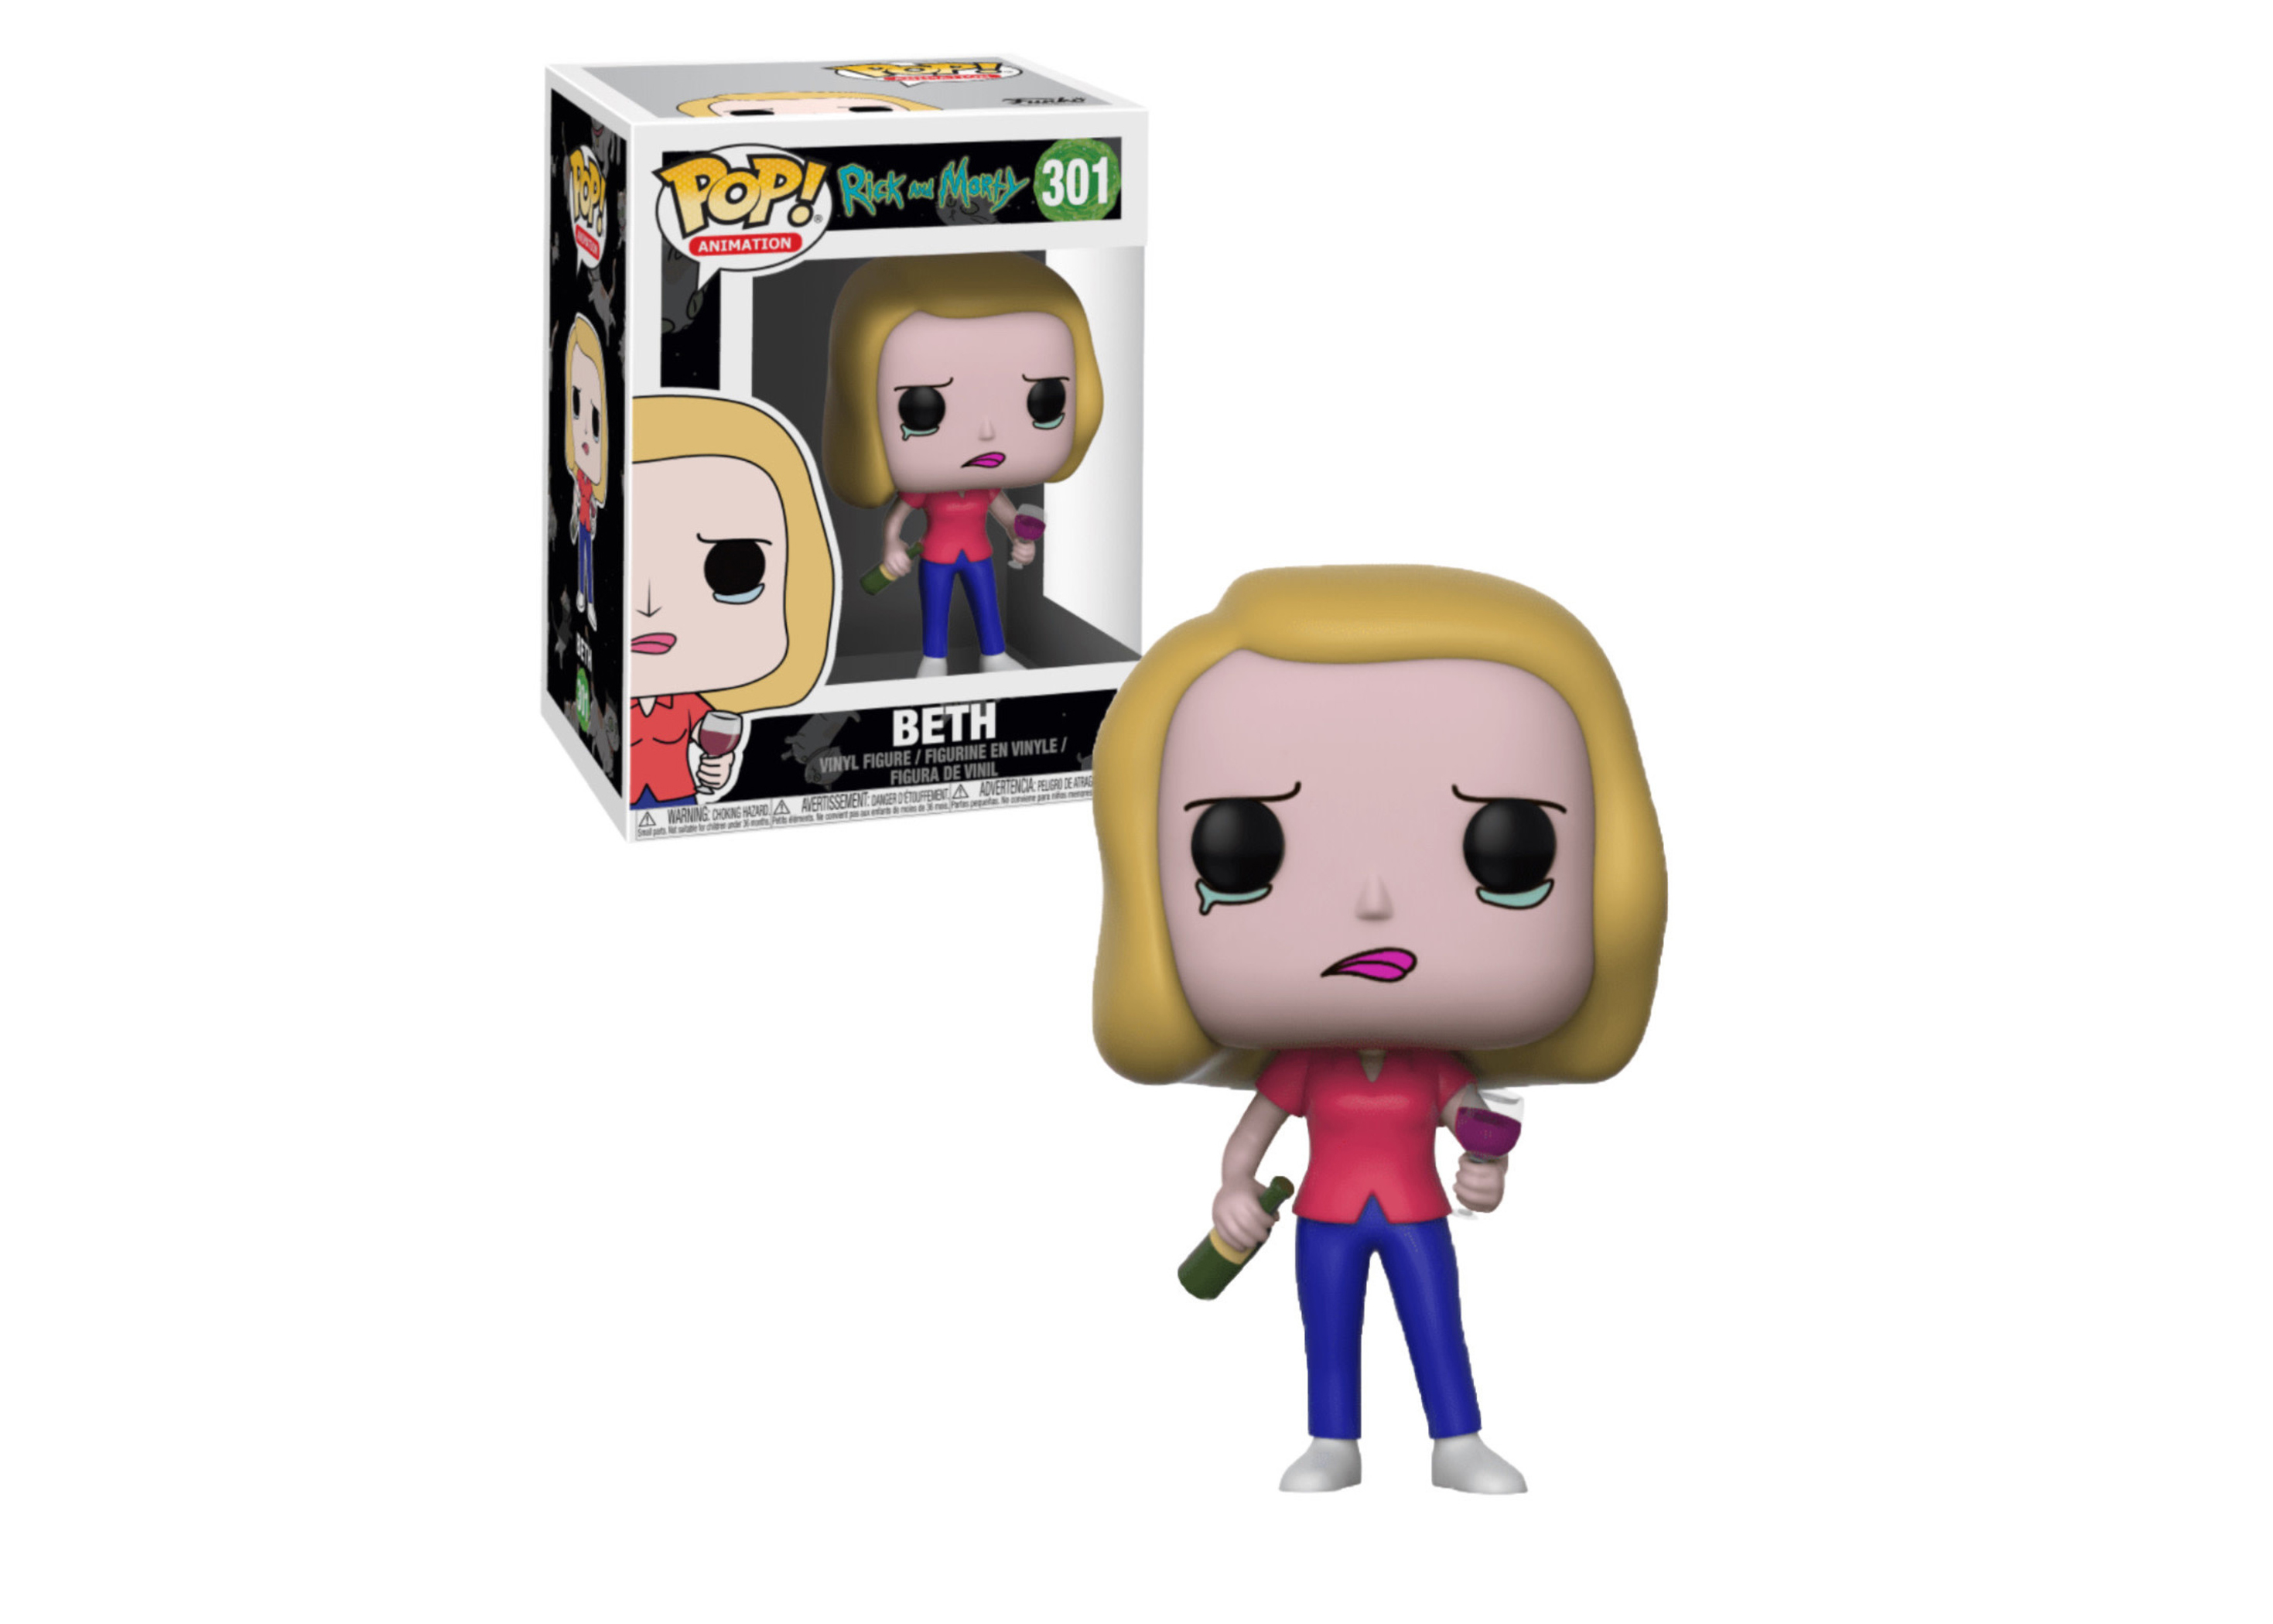 Beth The Rick and Morty TV Show POP Animation #301 Vinyl Figur Funko 